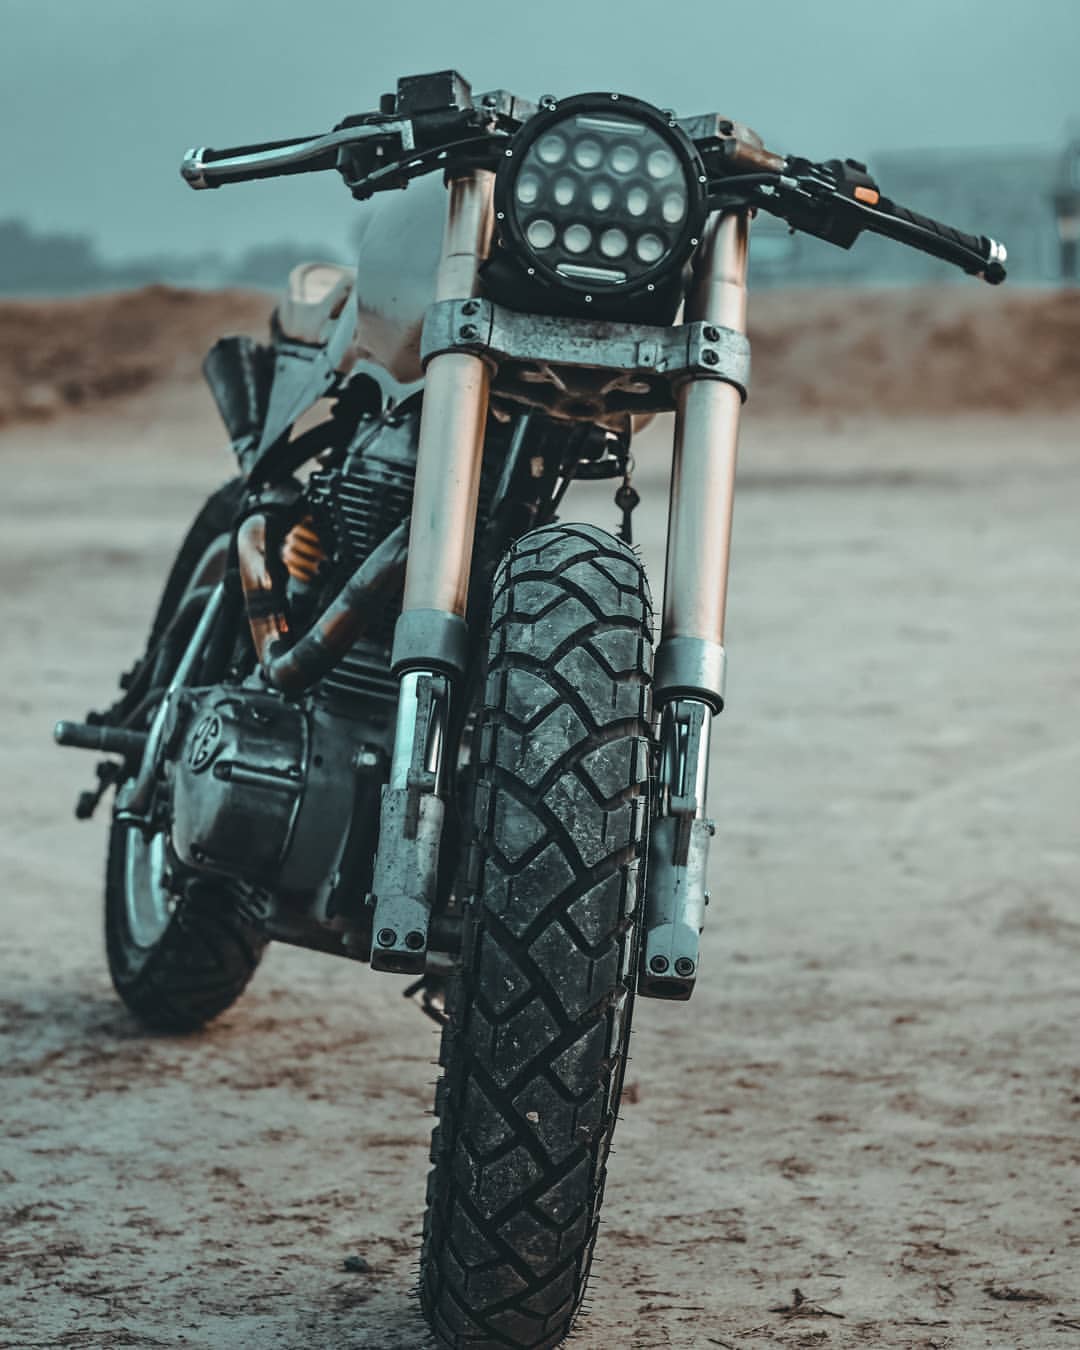 bullet,royalenfield,royalenfieldbullet,bullet350,classic350,bulletclassic350,bulletstandard350,royalenfieldclassic,royalenfieldstandard350,bullet500,bulletindia,indianbikes,bulletbike,royalenfieldindia,royalenfieldhimalayan,royalenfieldlovers,bulletlovers,limitededition,specialedition,infographic